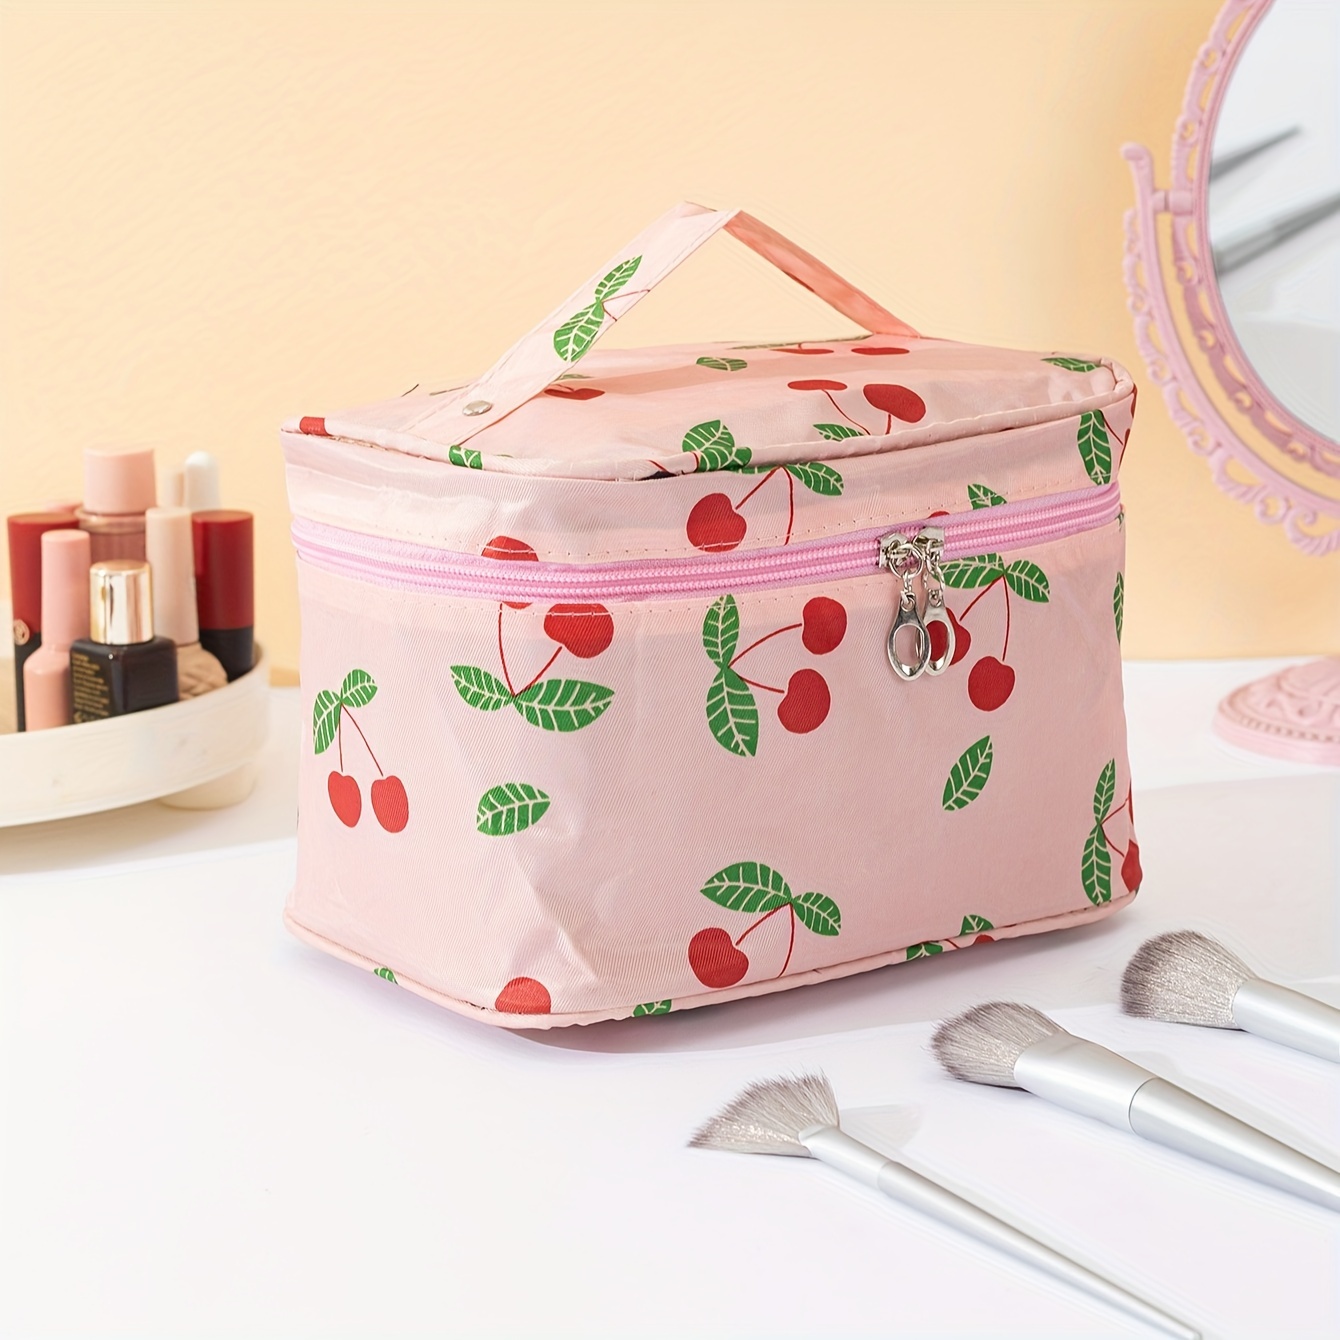 

Makeup Bag Travel Portable Cosmetic Storage Bag Make Up Organizer Bag With Mesh Pocket Waterproof Large Capacity Toiletry Storage Bags Cute For Women, Cherry Pattern